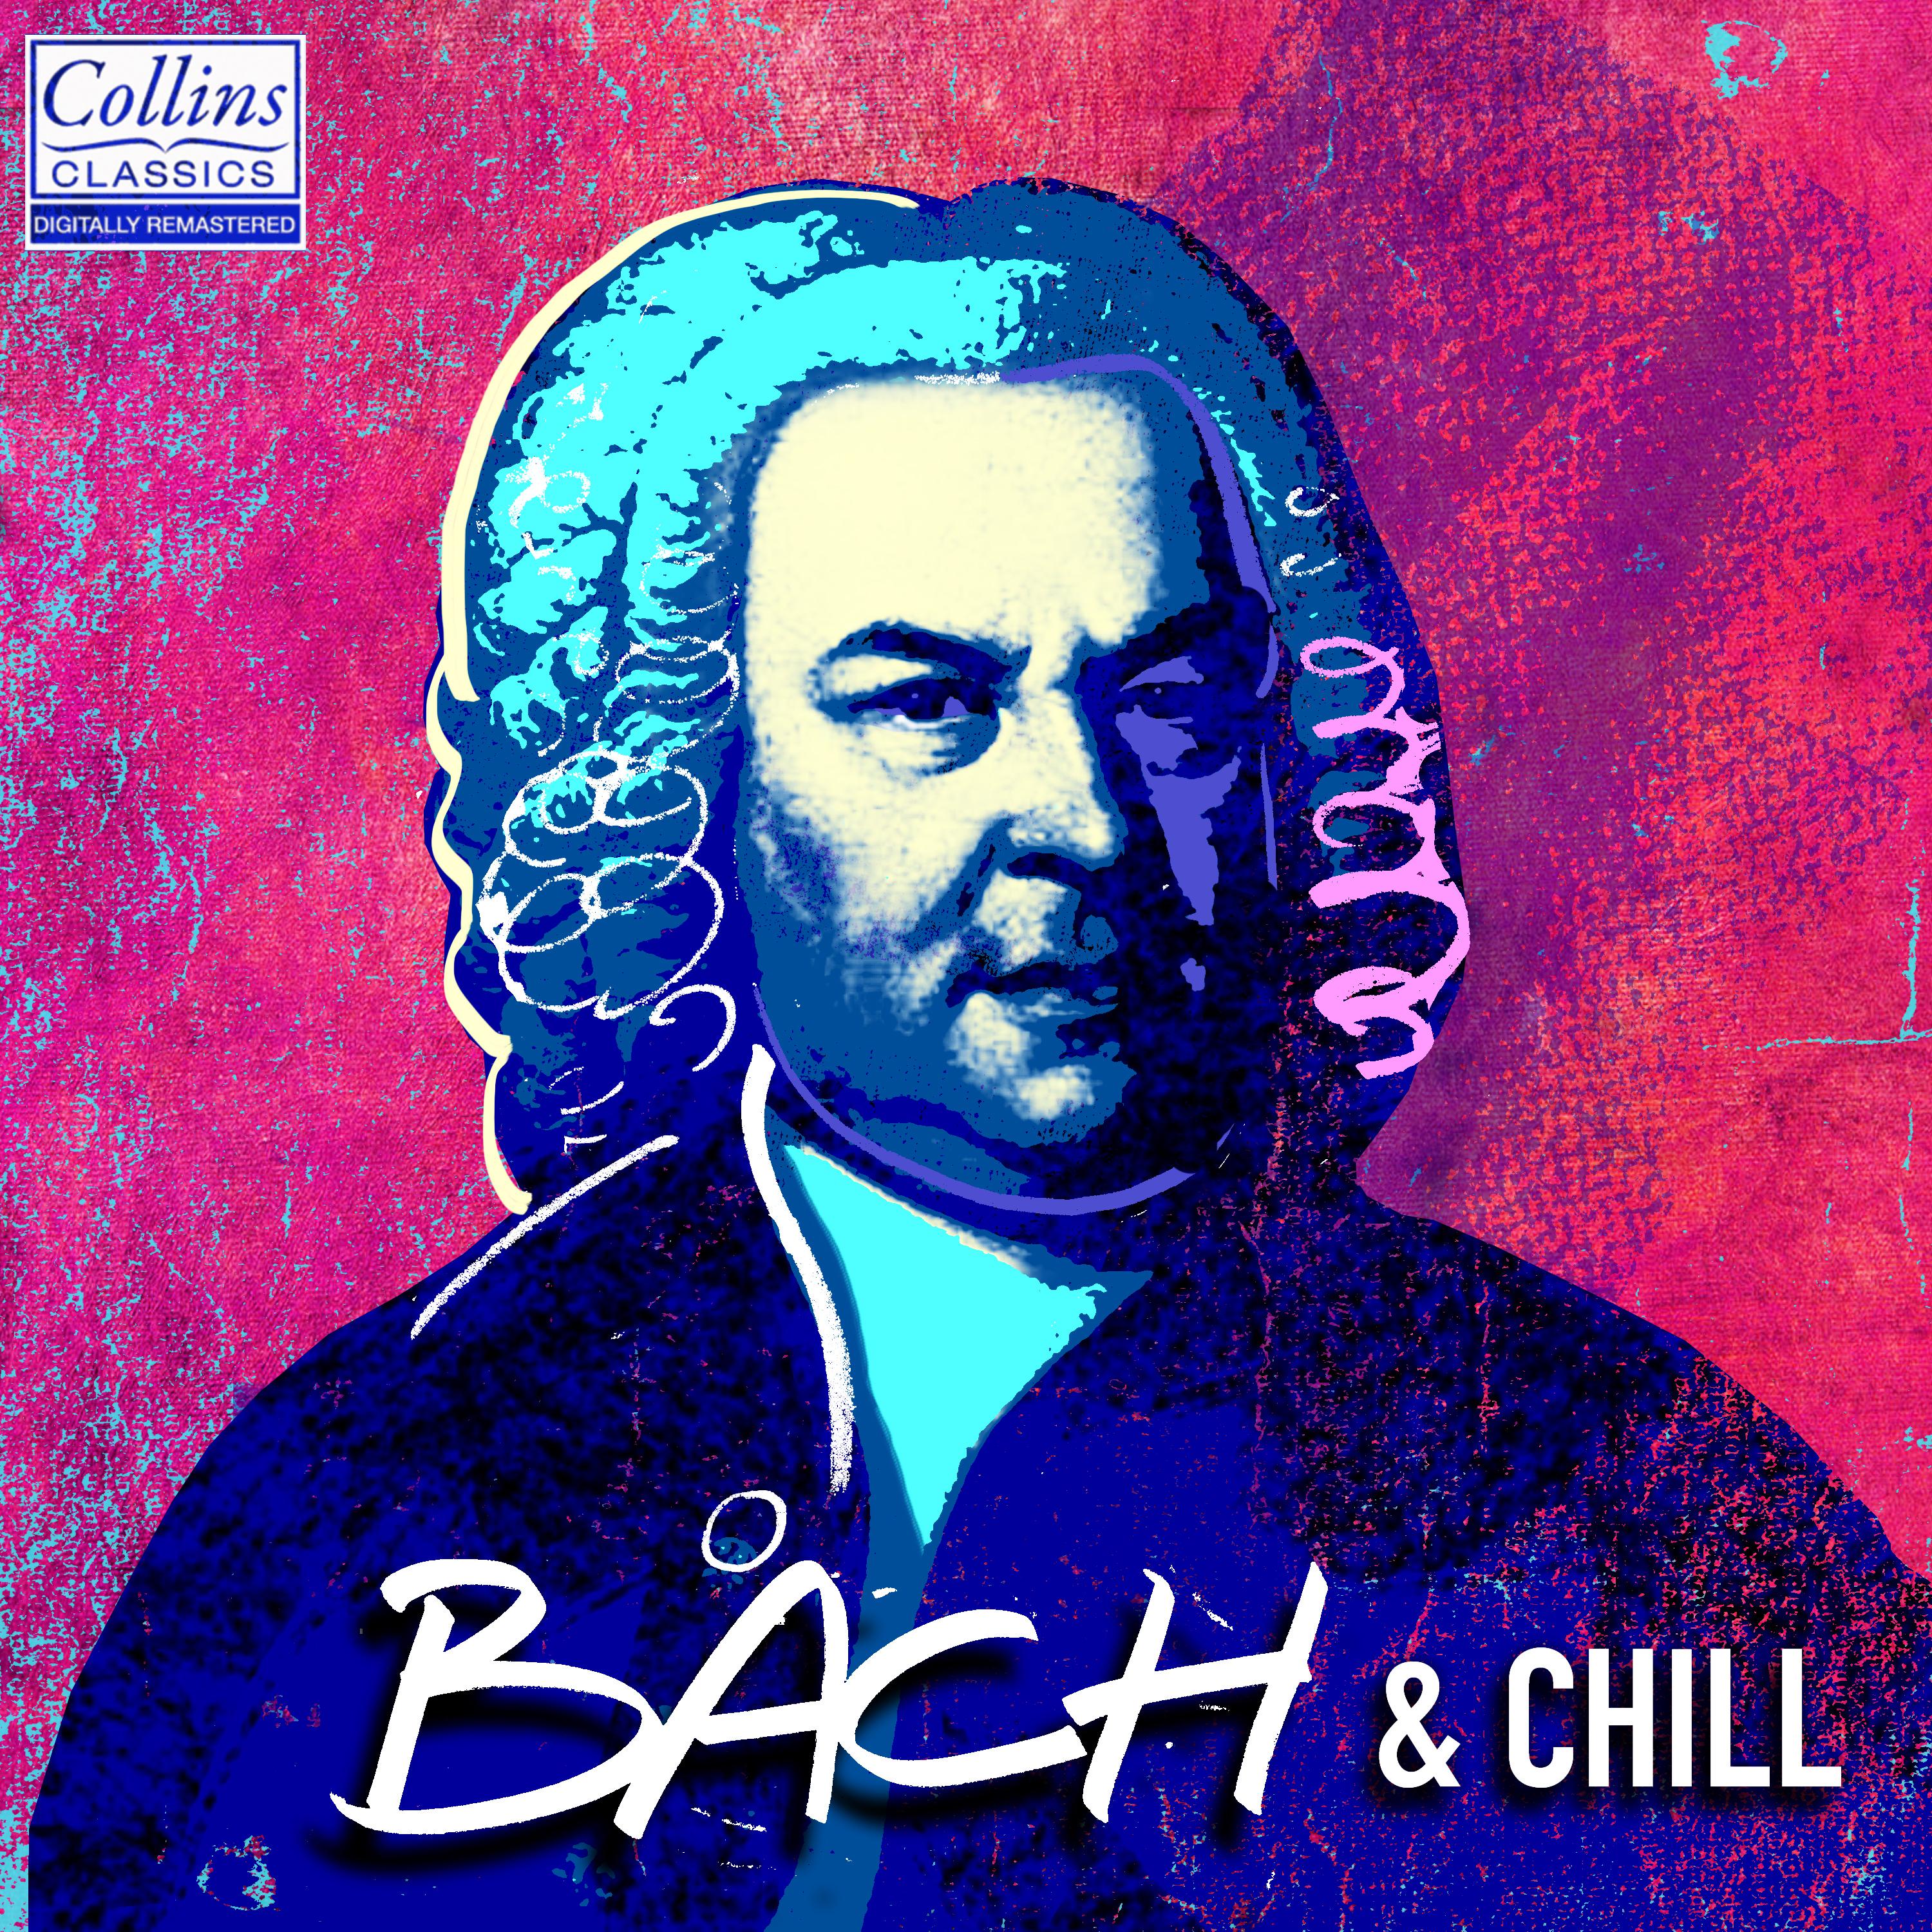 Orchestral Suite No.3 in D Major, BWV 1068: II. Air